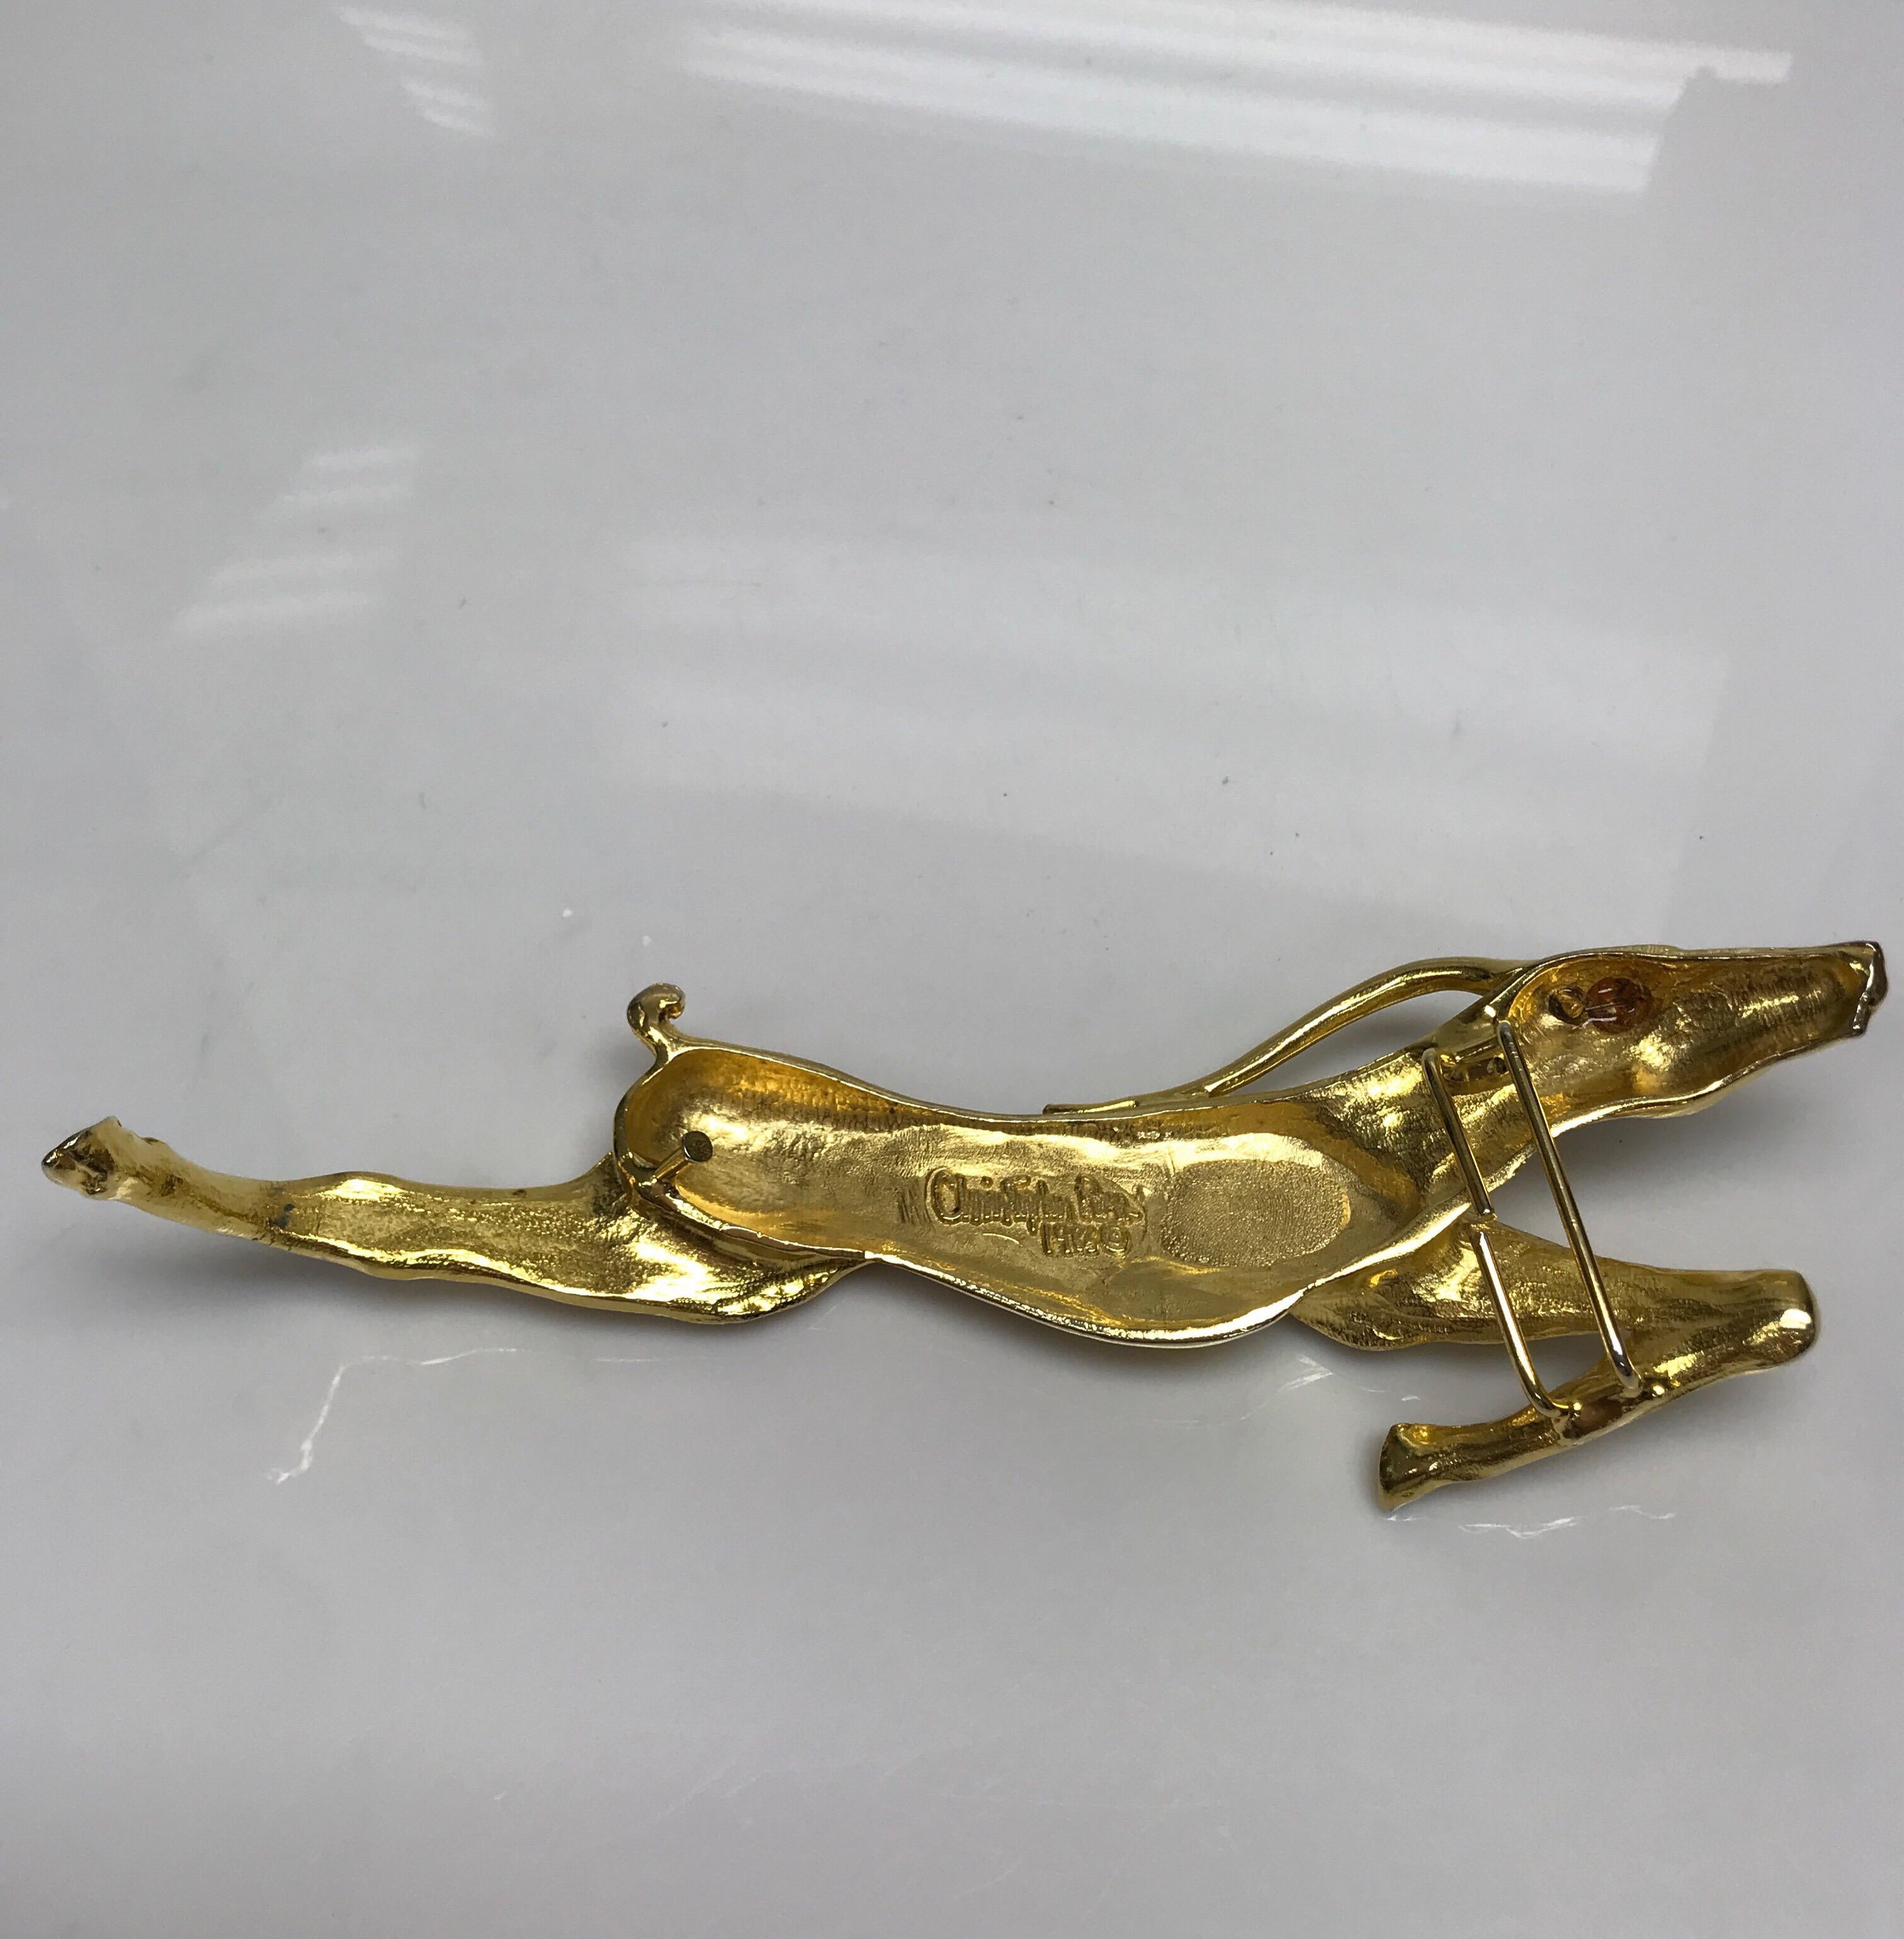 Christopher Ross Gold Large Reindeer Vintage Buckle-1986. This amazing vintage Christopher Ross buckle is in great condition. It has some sign of use that is consistent with age. This piece is gold throughout and is in the shape of a reindeer. It is